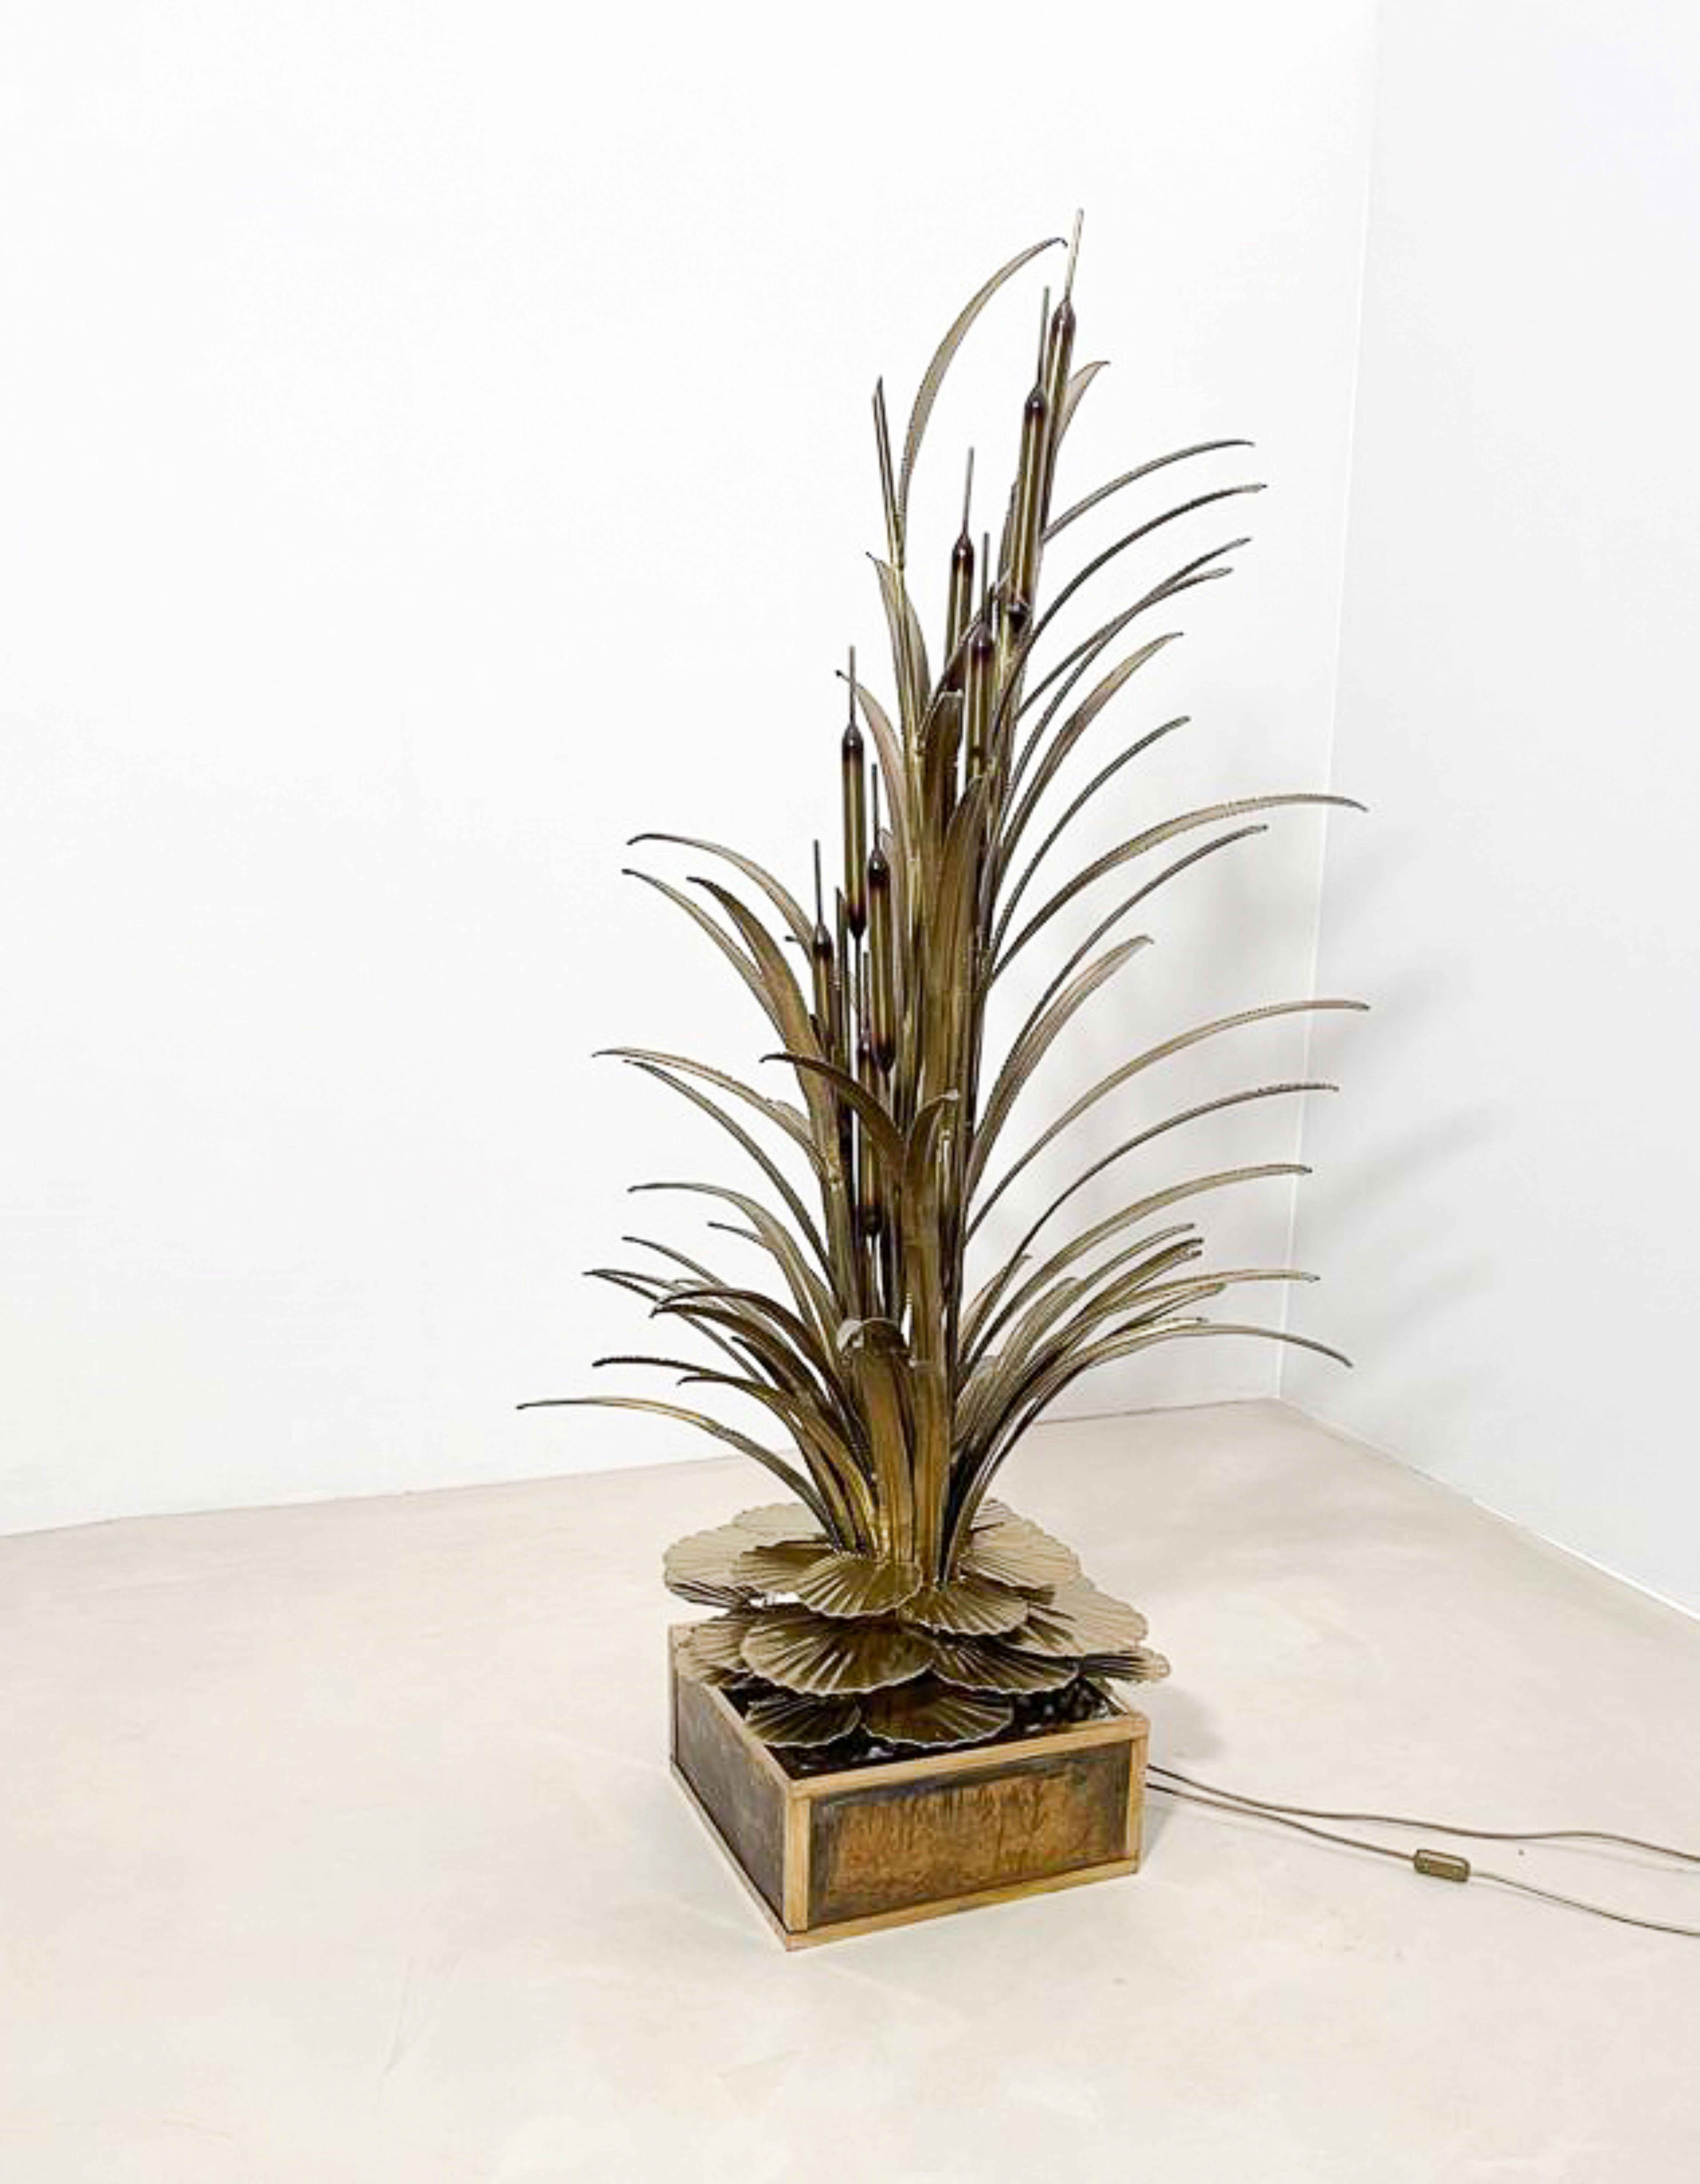 Bulrush and water Lilies floor lamp by Maison Jansen, France, 1970s.